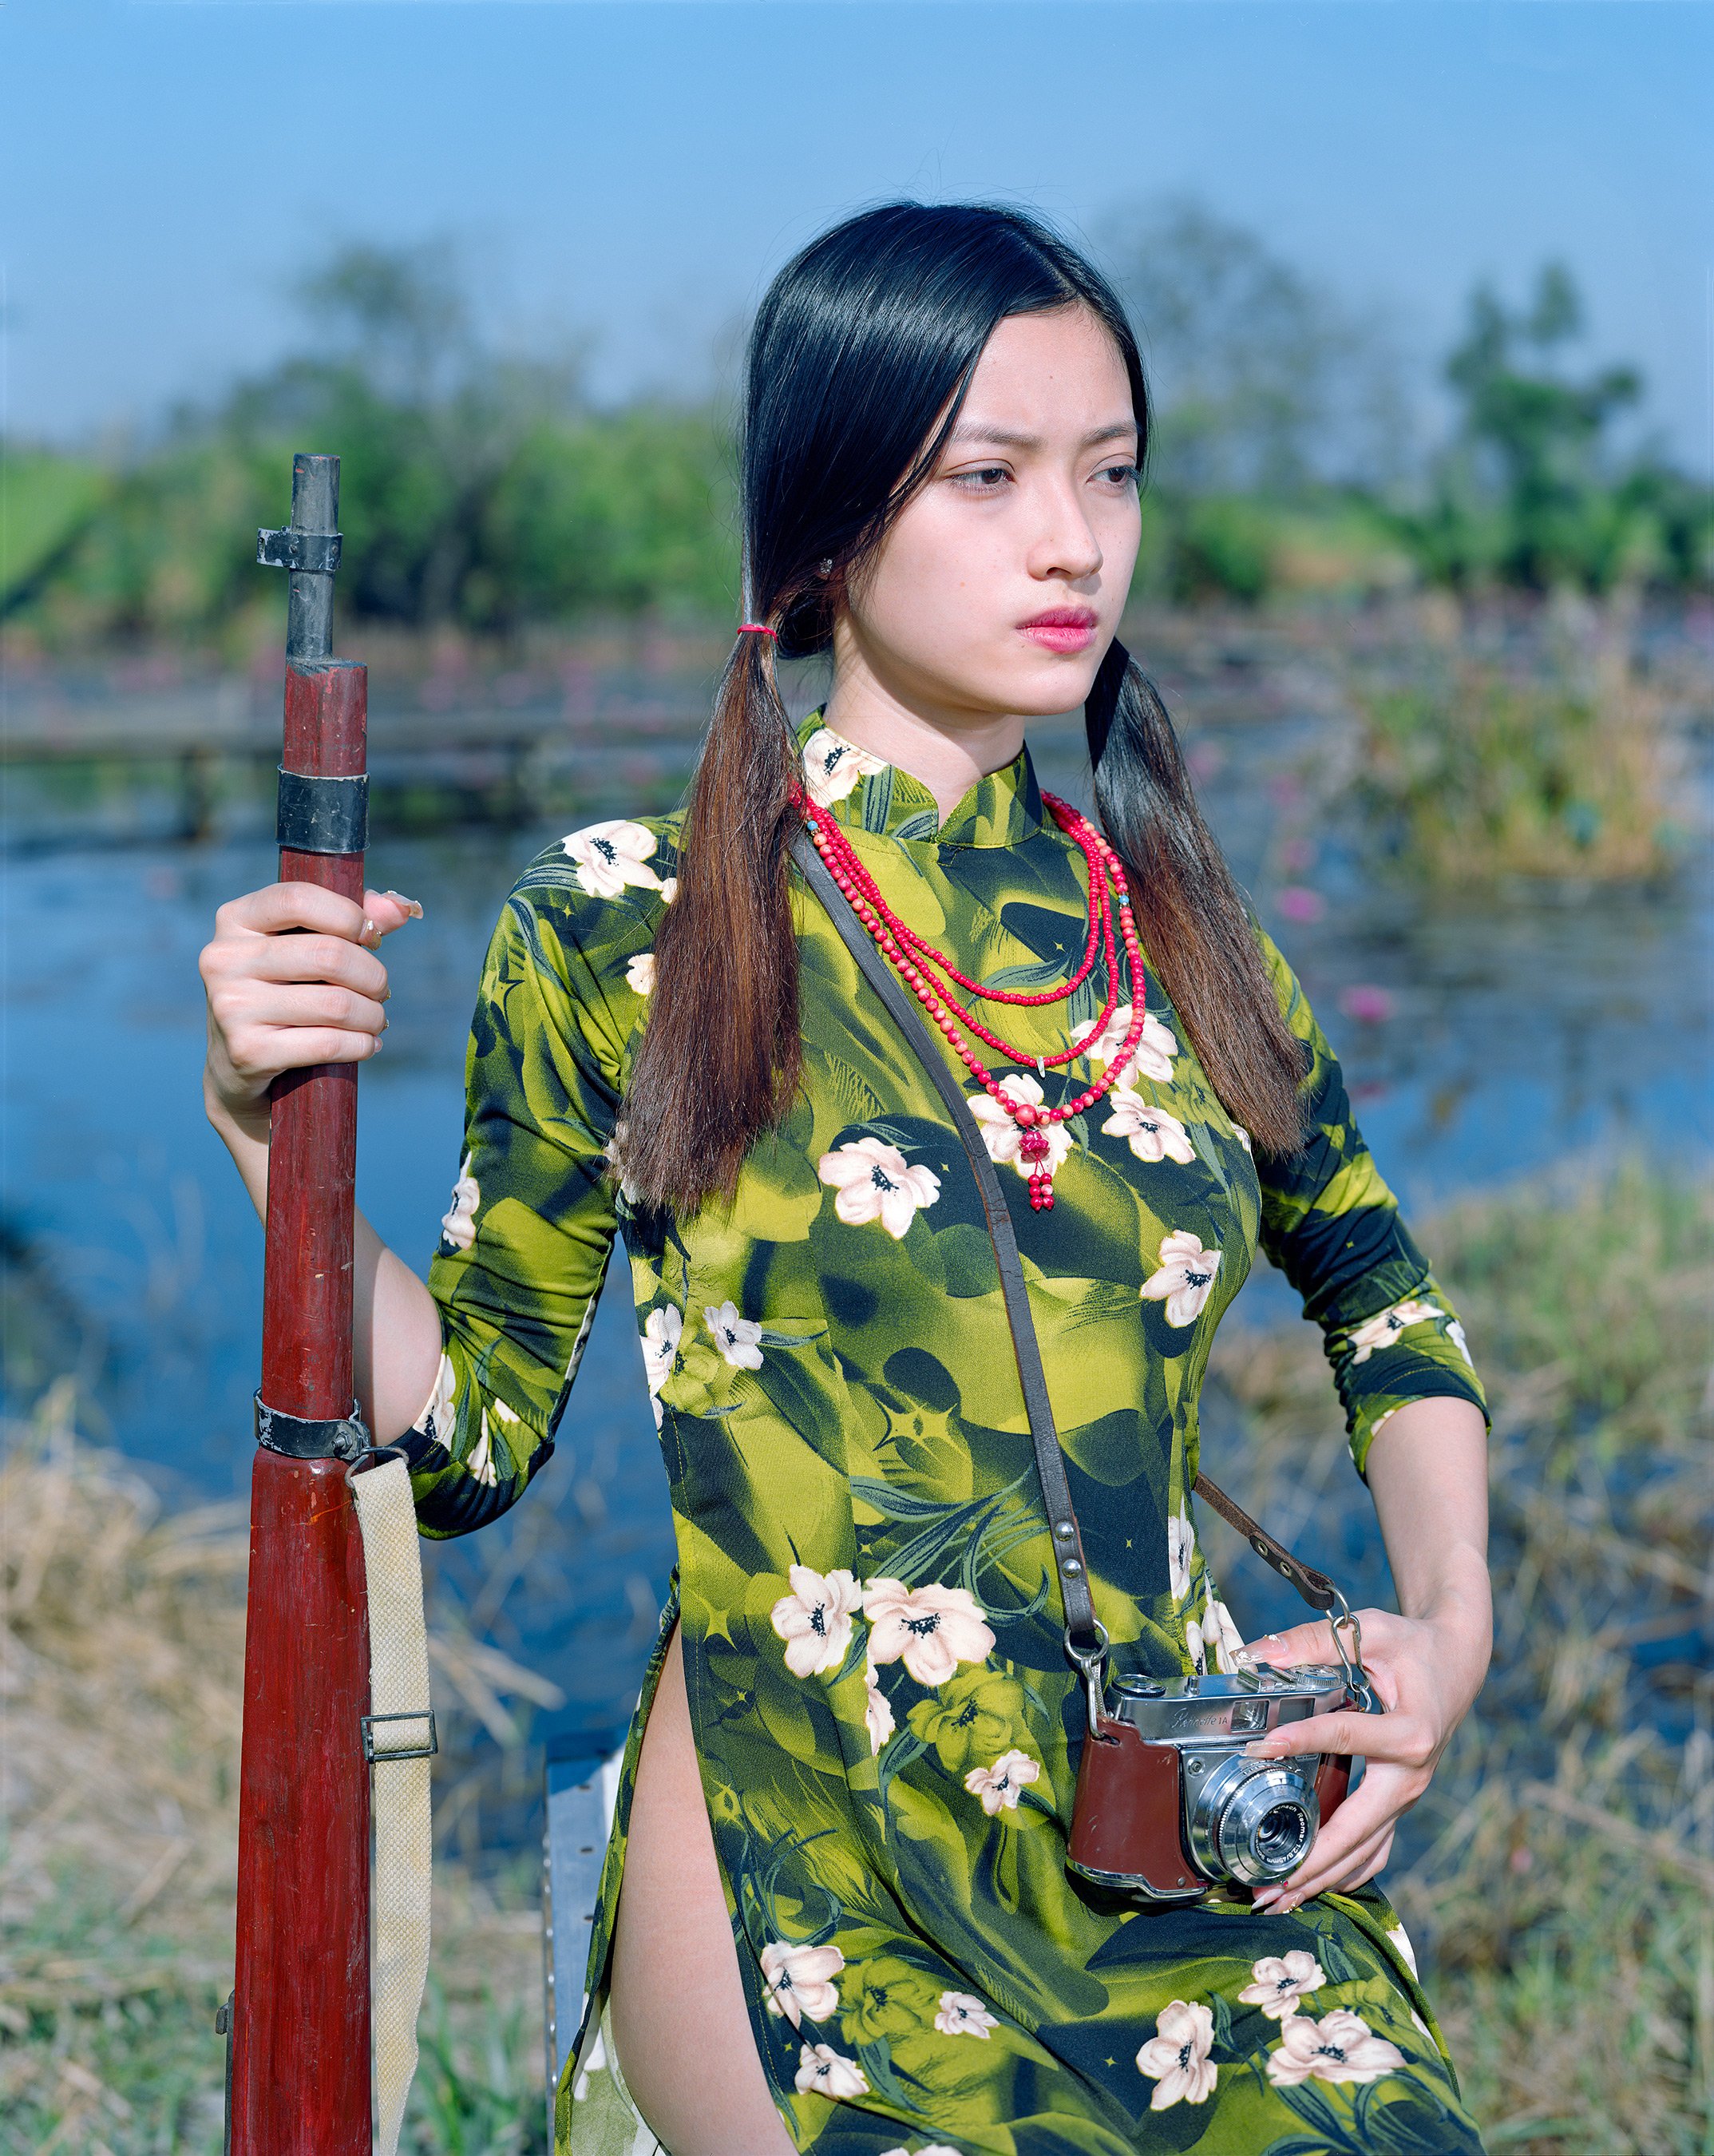   Sis{Quynh},   from the '{City of Virgins}' series. sRGB1966 (Collection de l'artiste)76.8 x 62.23 cm.(30 1/4 x 24 1/4 inch.) 